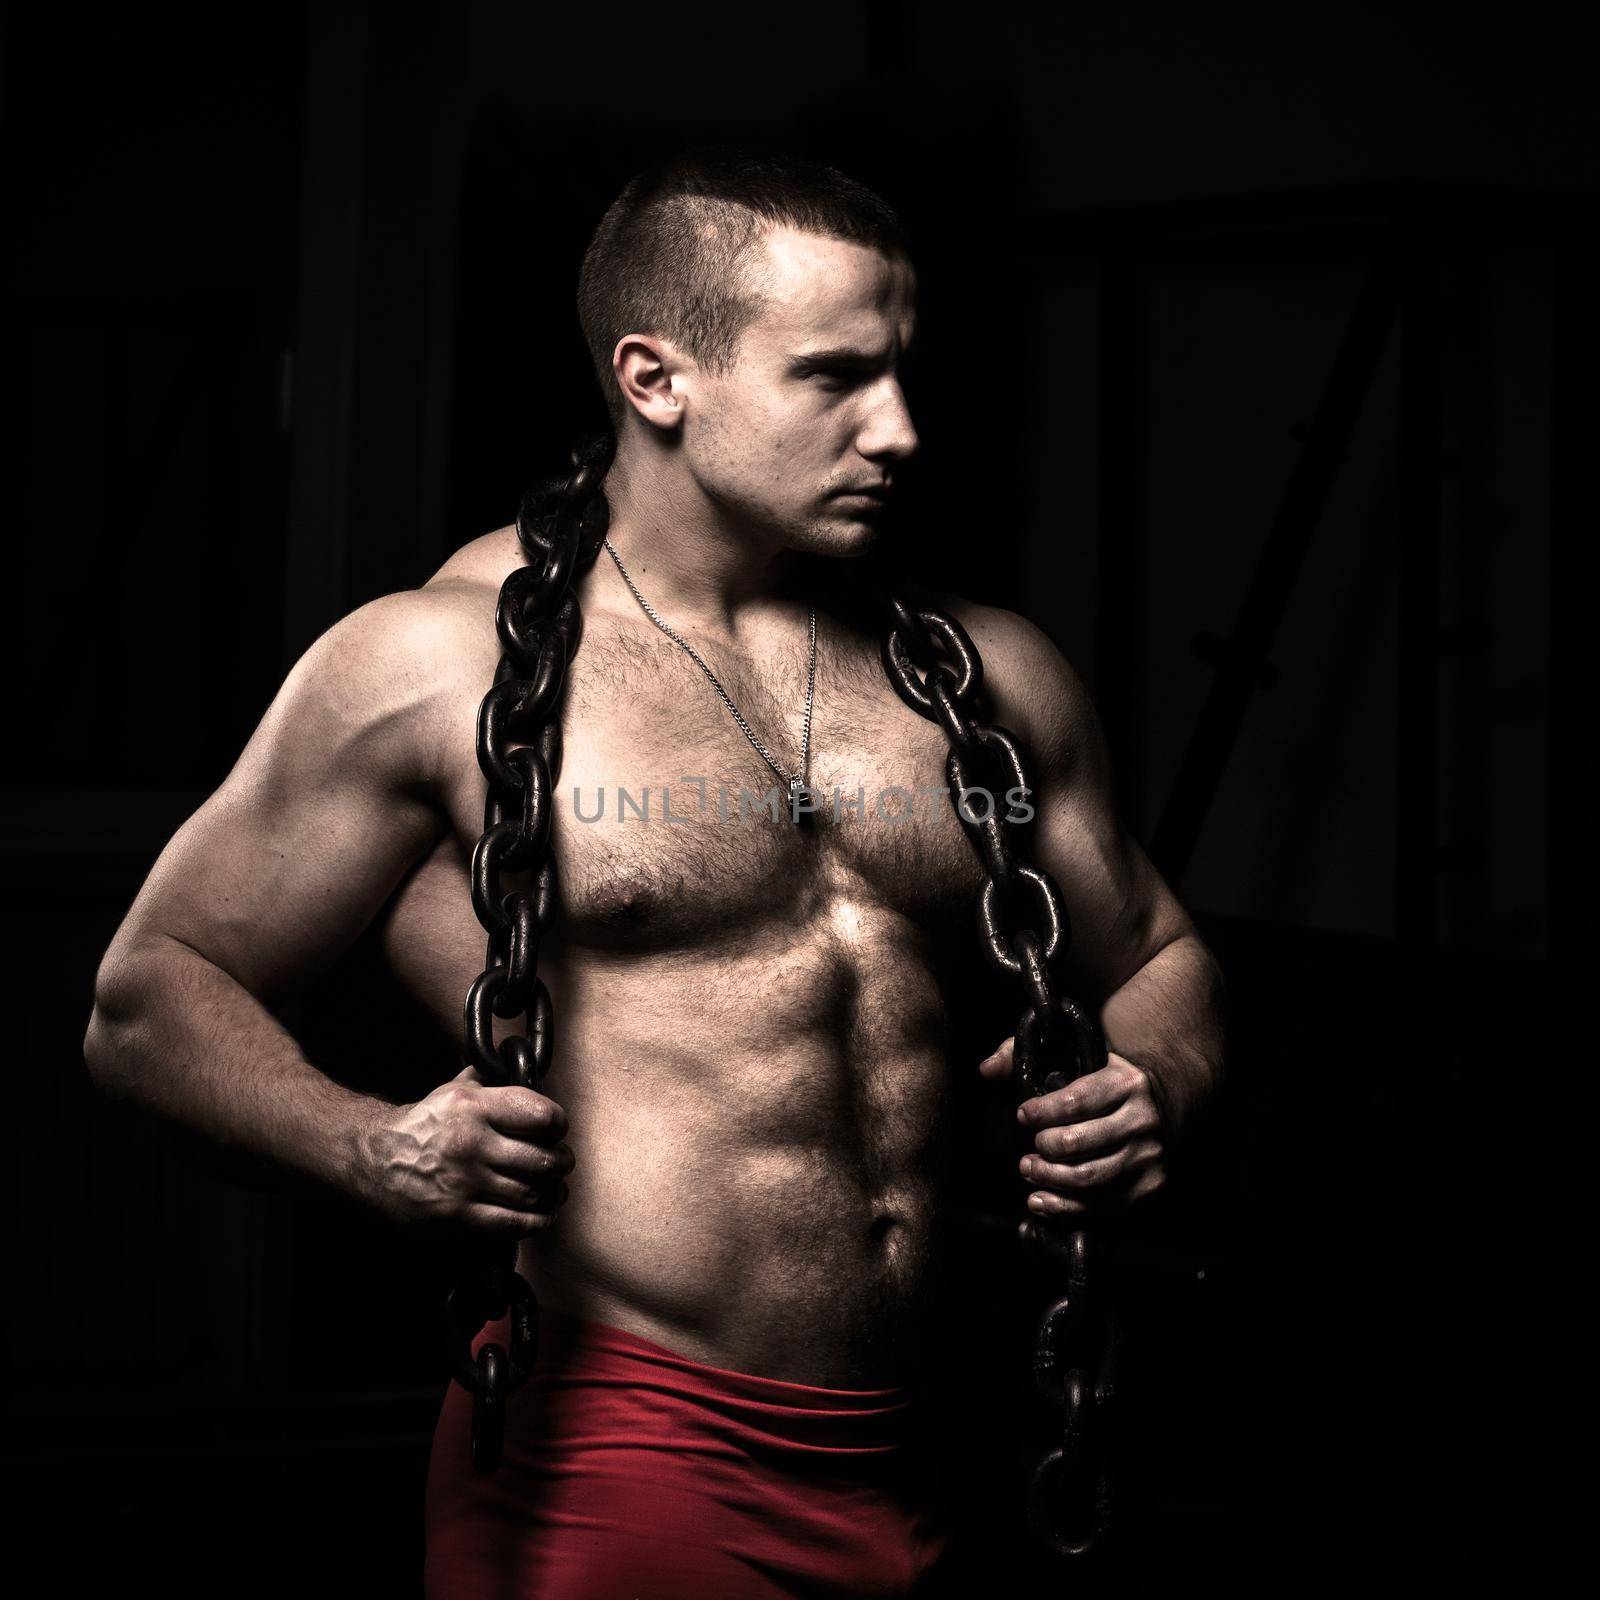 Portrait of a bodybuilder with a chain around his neck on a black background